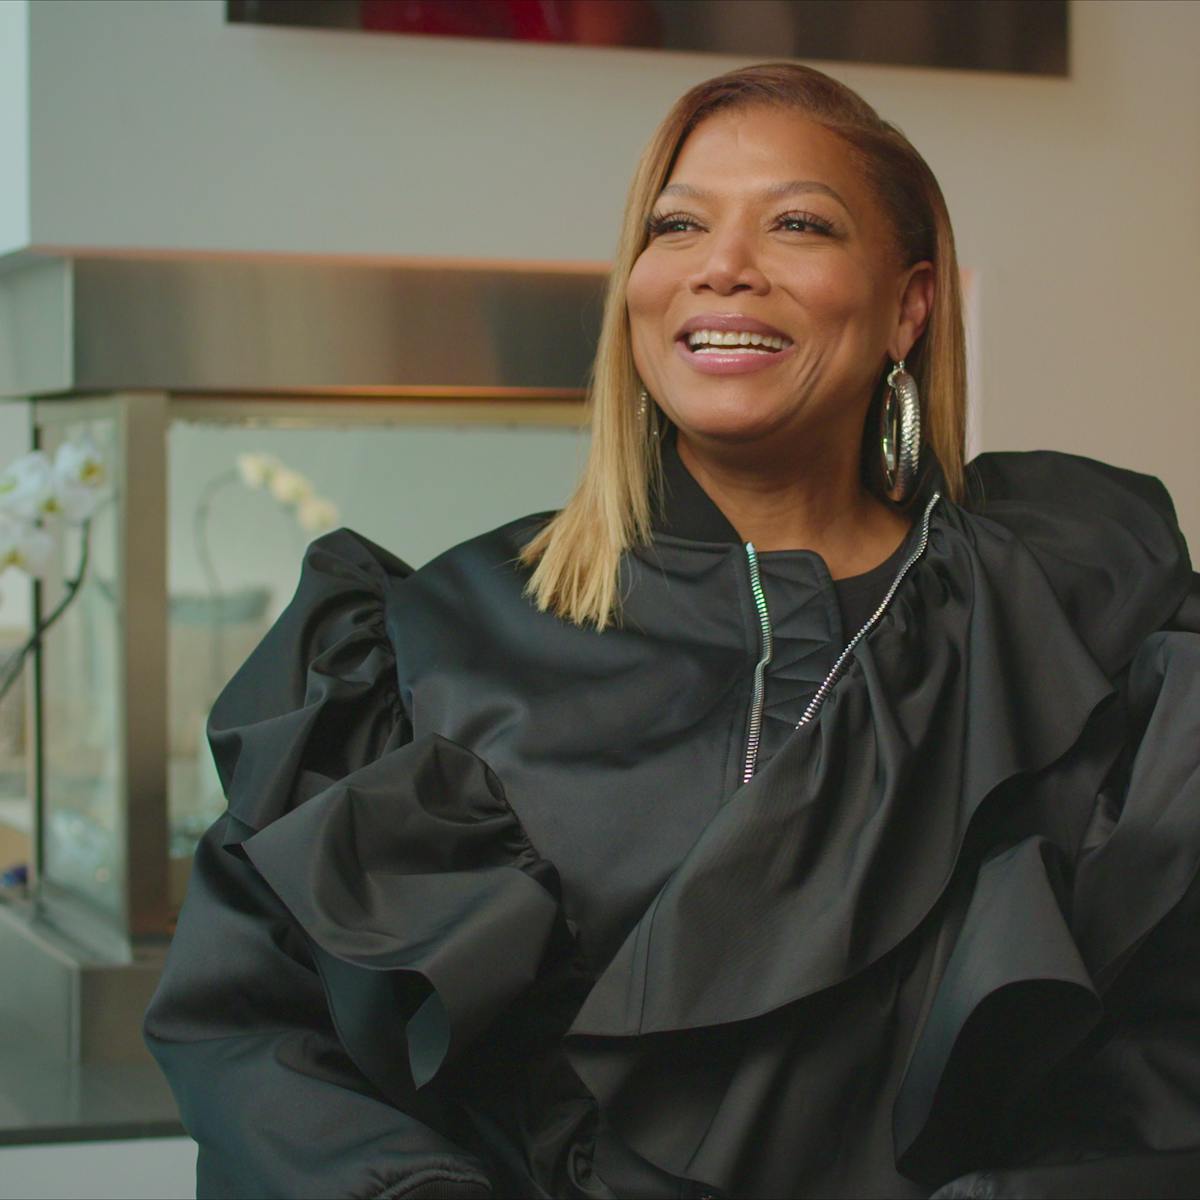 Queen Latifah wears a zippered, ruffled, black top and huge silver hoops. She smiles and looks at something off-camera. 